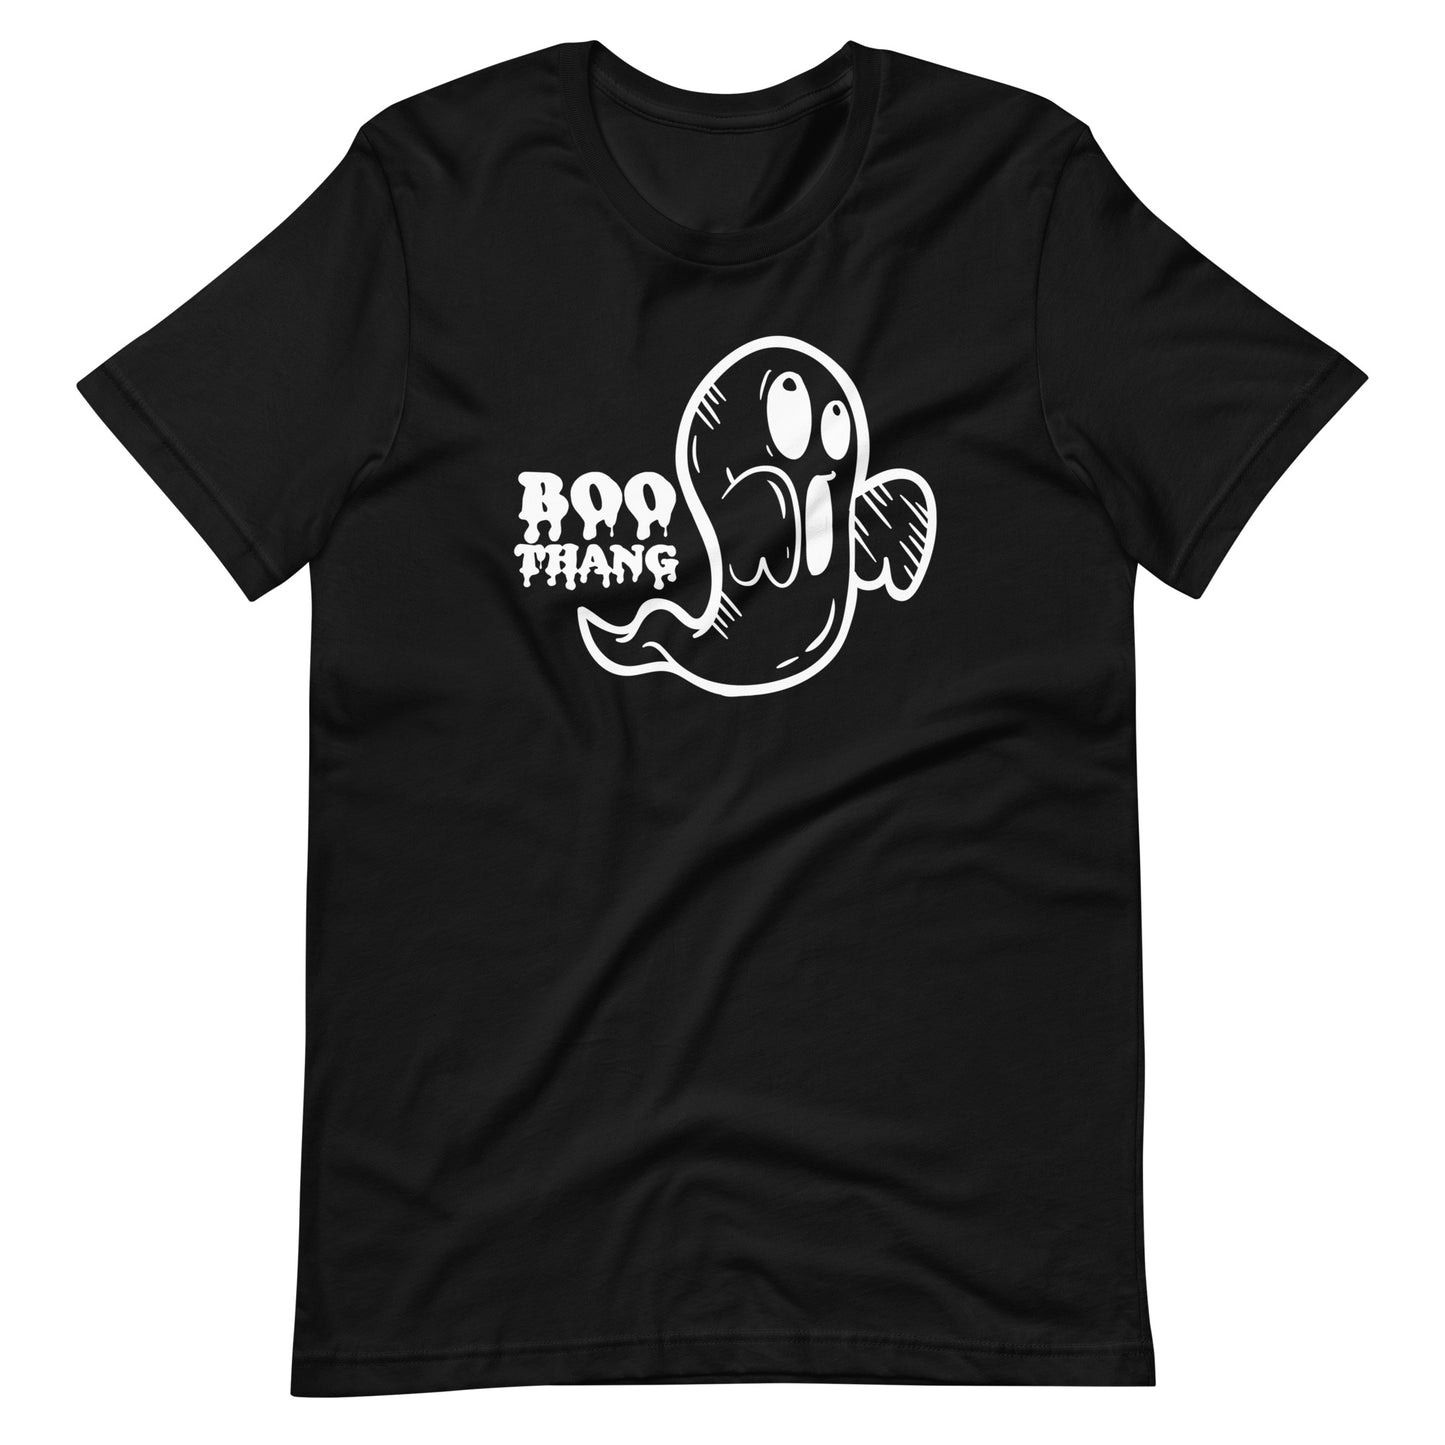 Boo thang Unisex t-shirt in White